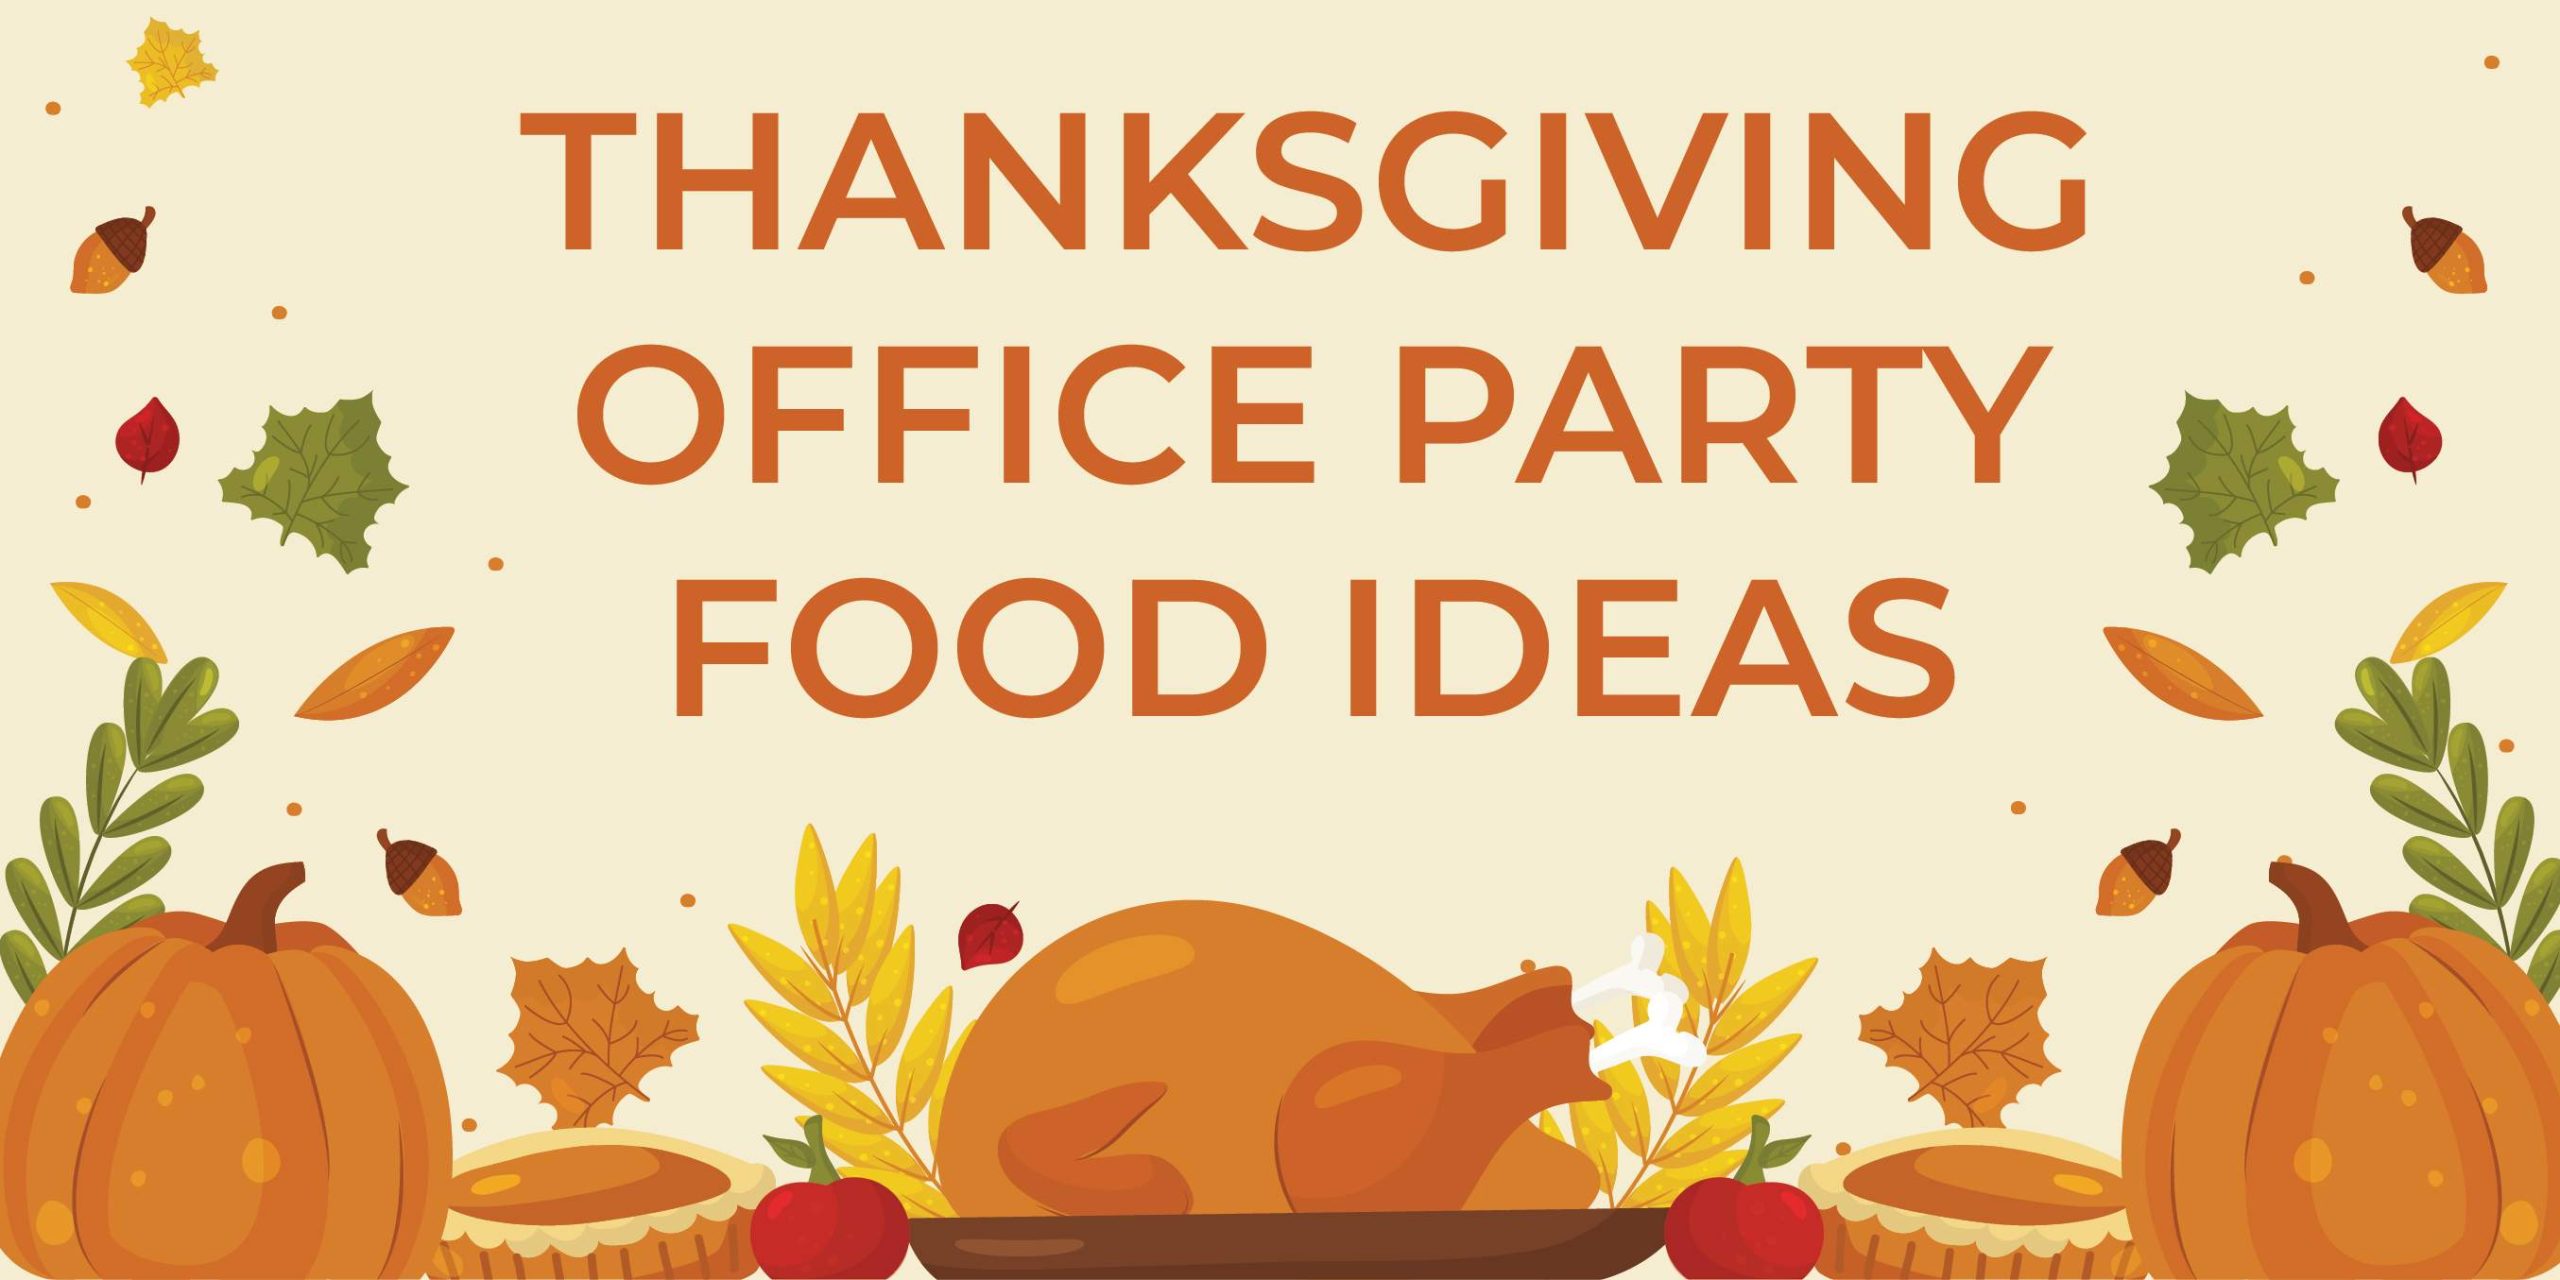 Thanksgiving Office Party Food Ideas